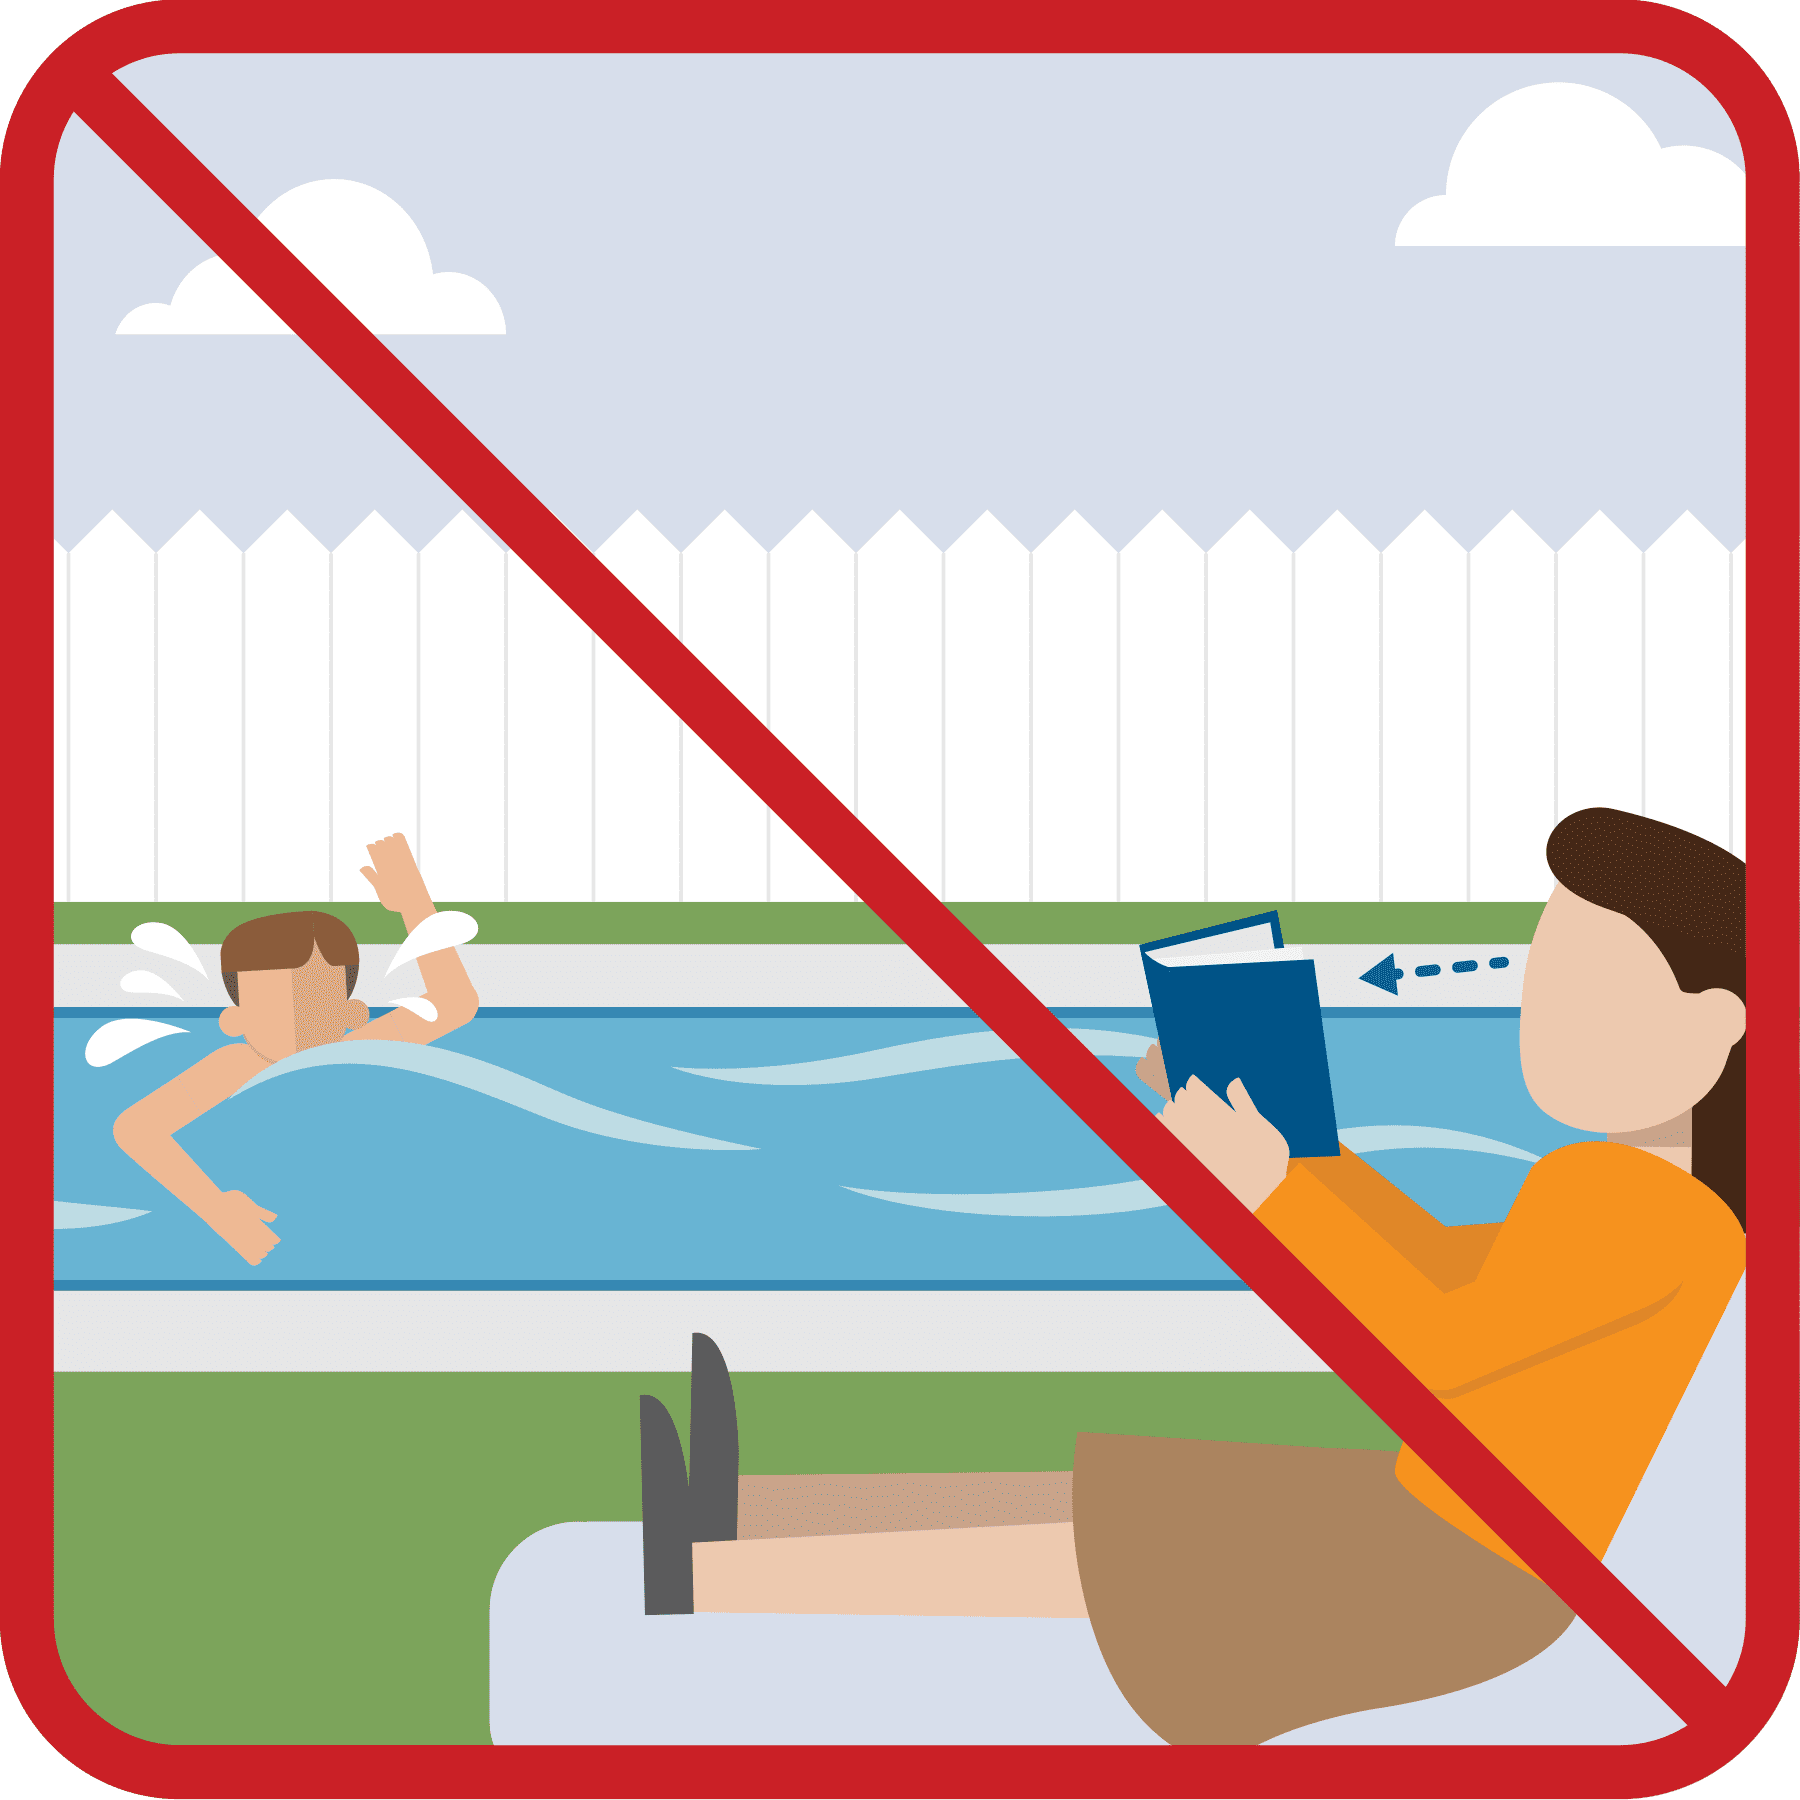 don't let distractions take away from those in the pool